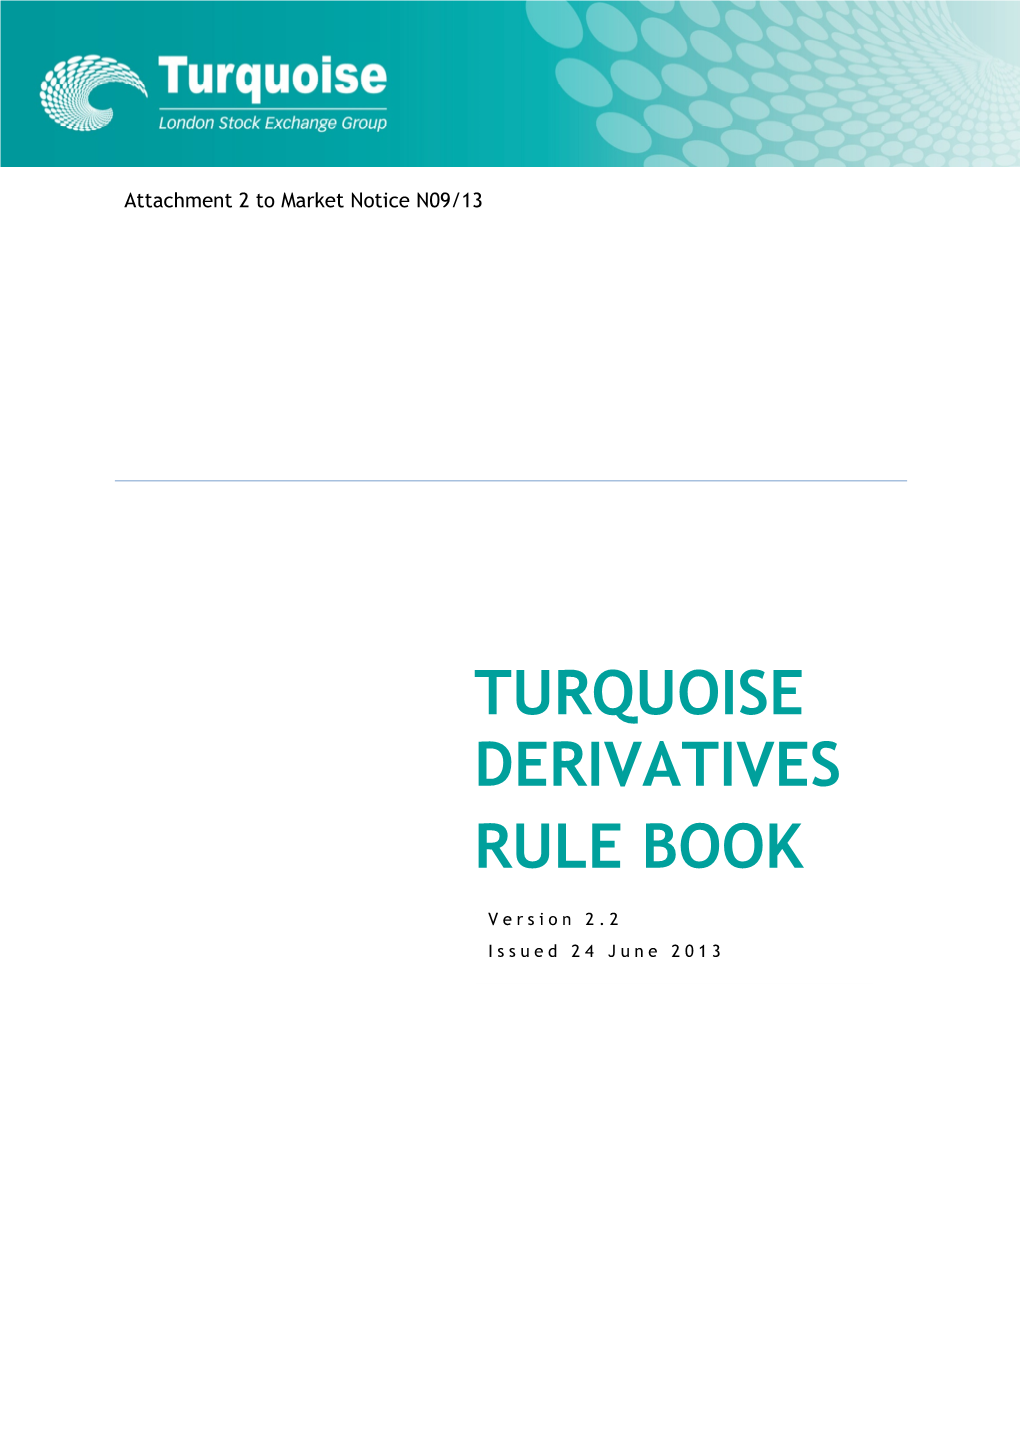 Turquoise Derivatives Rule Book